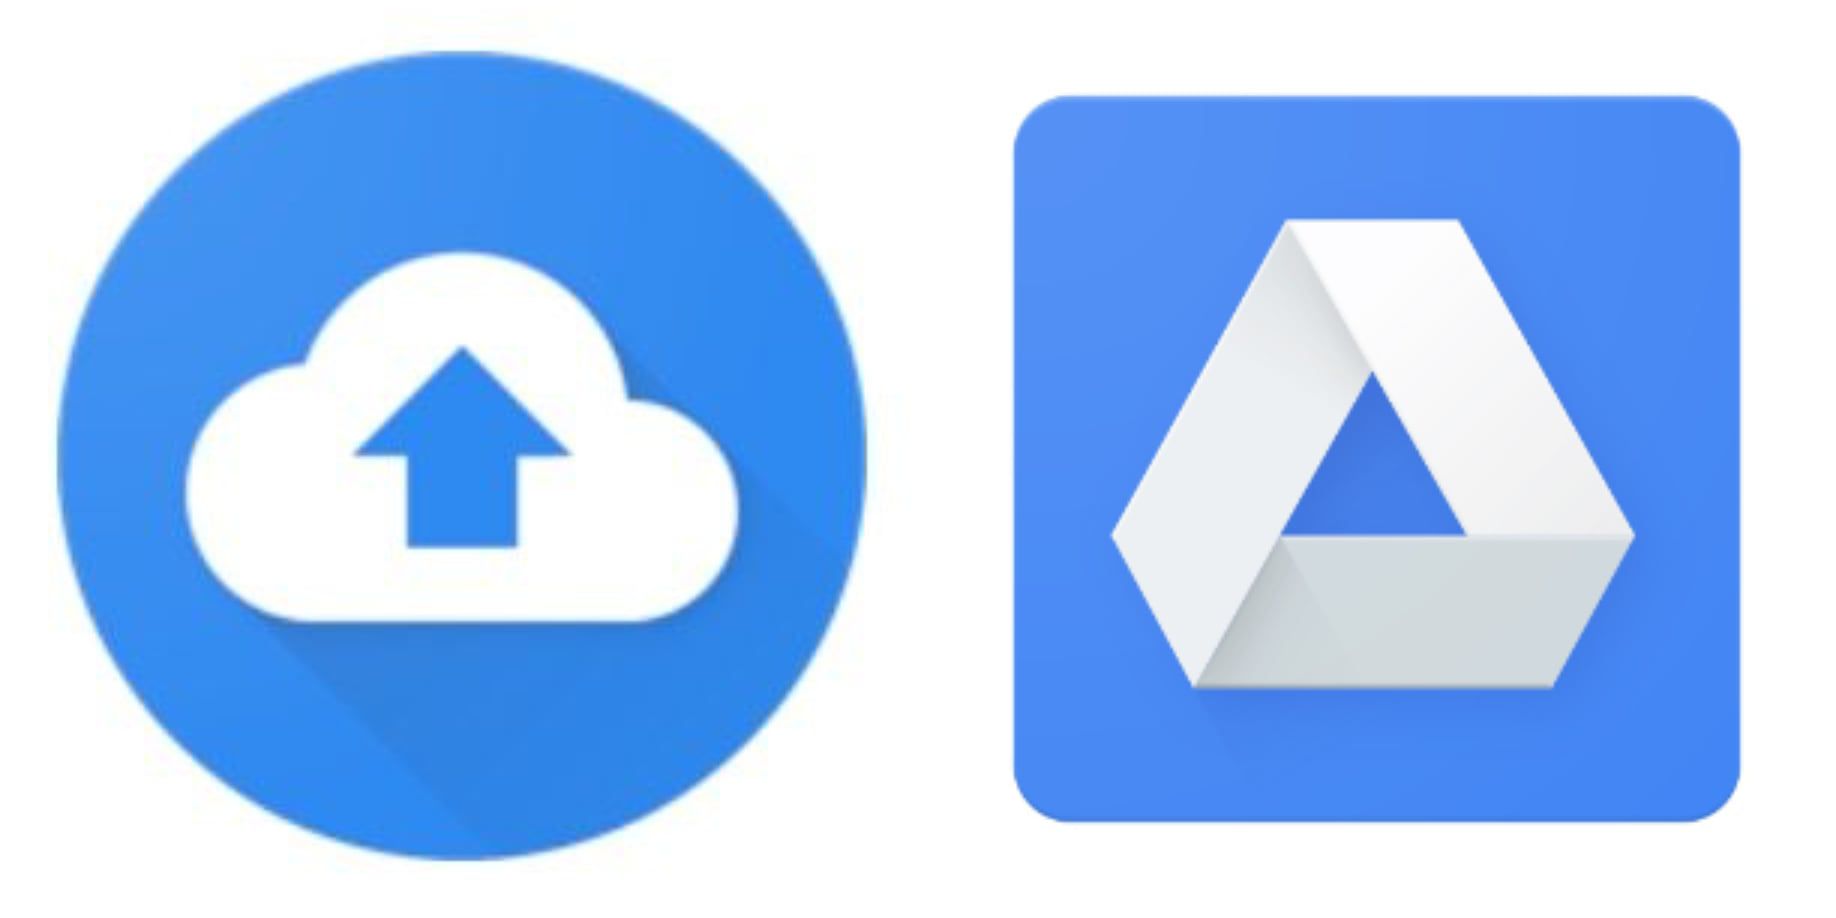 What replaced Google Sync?